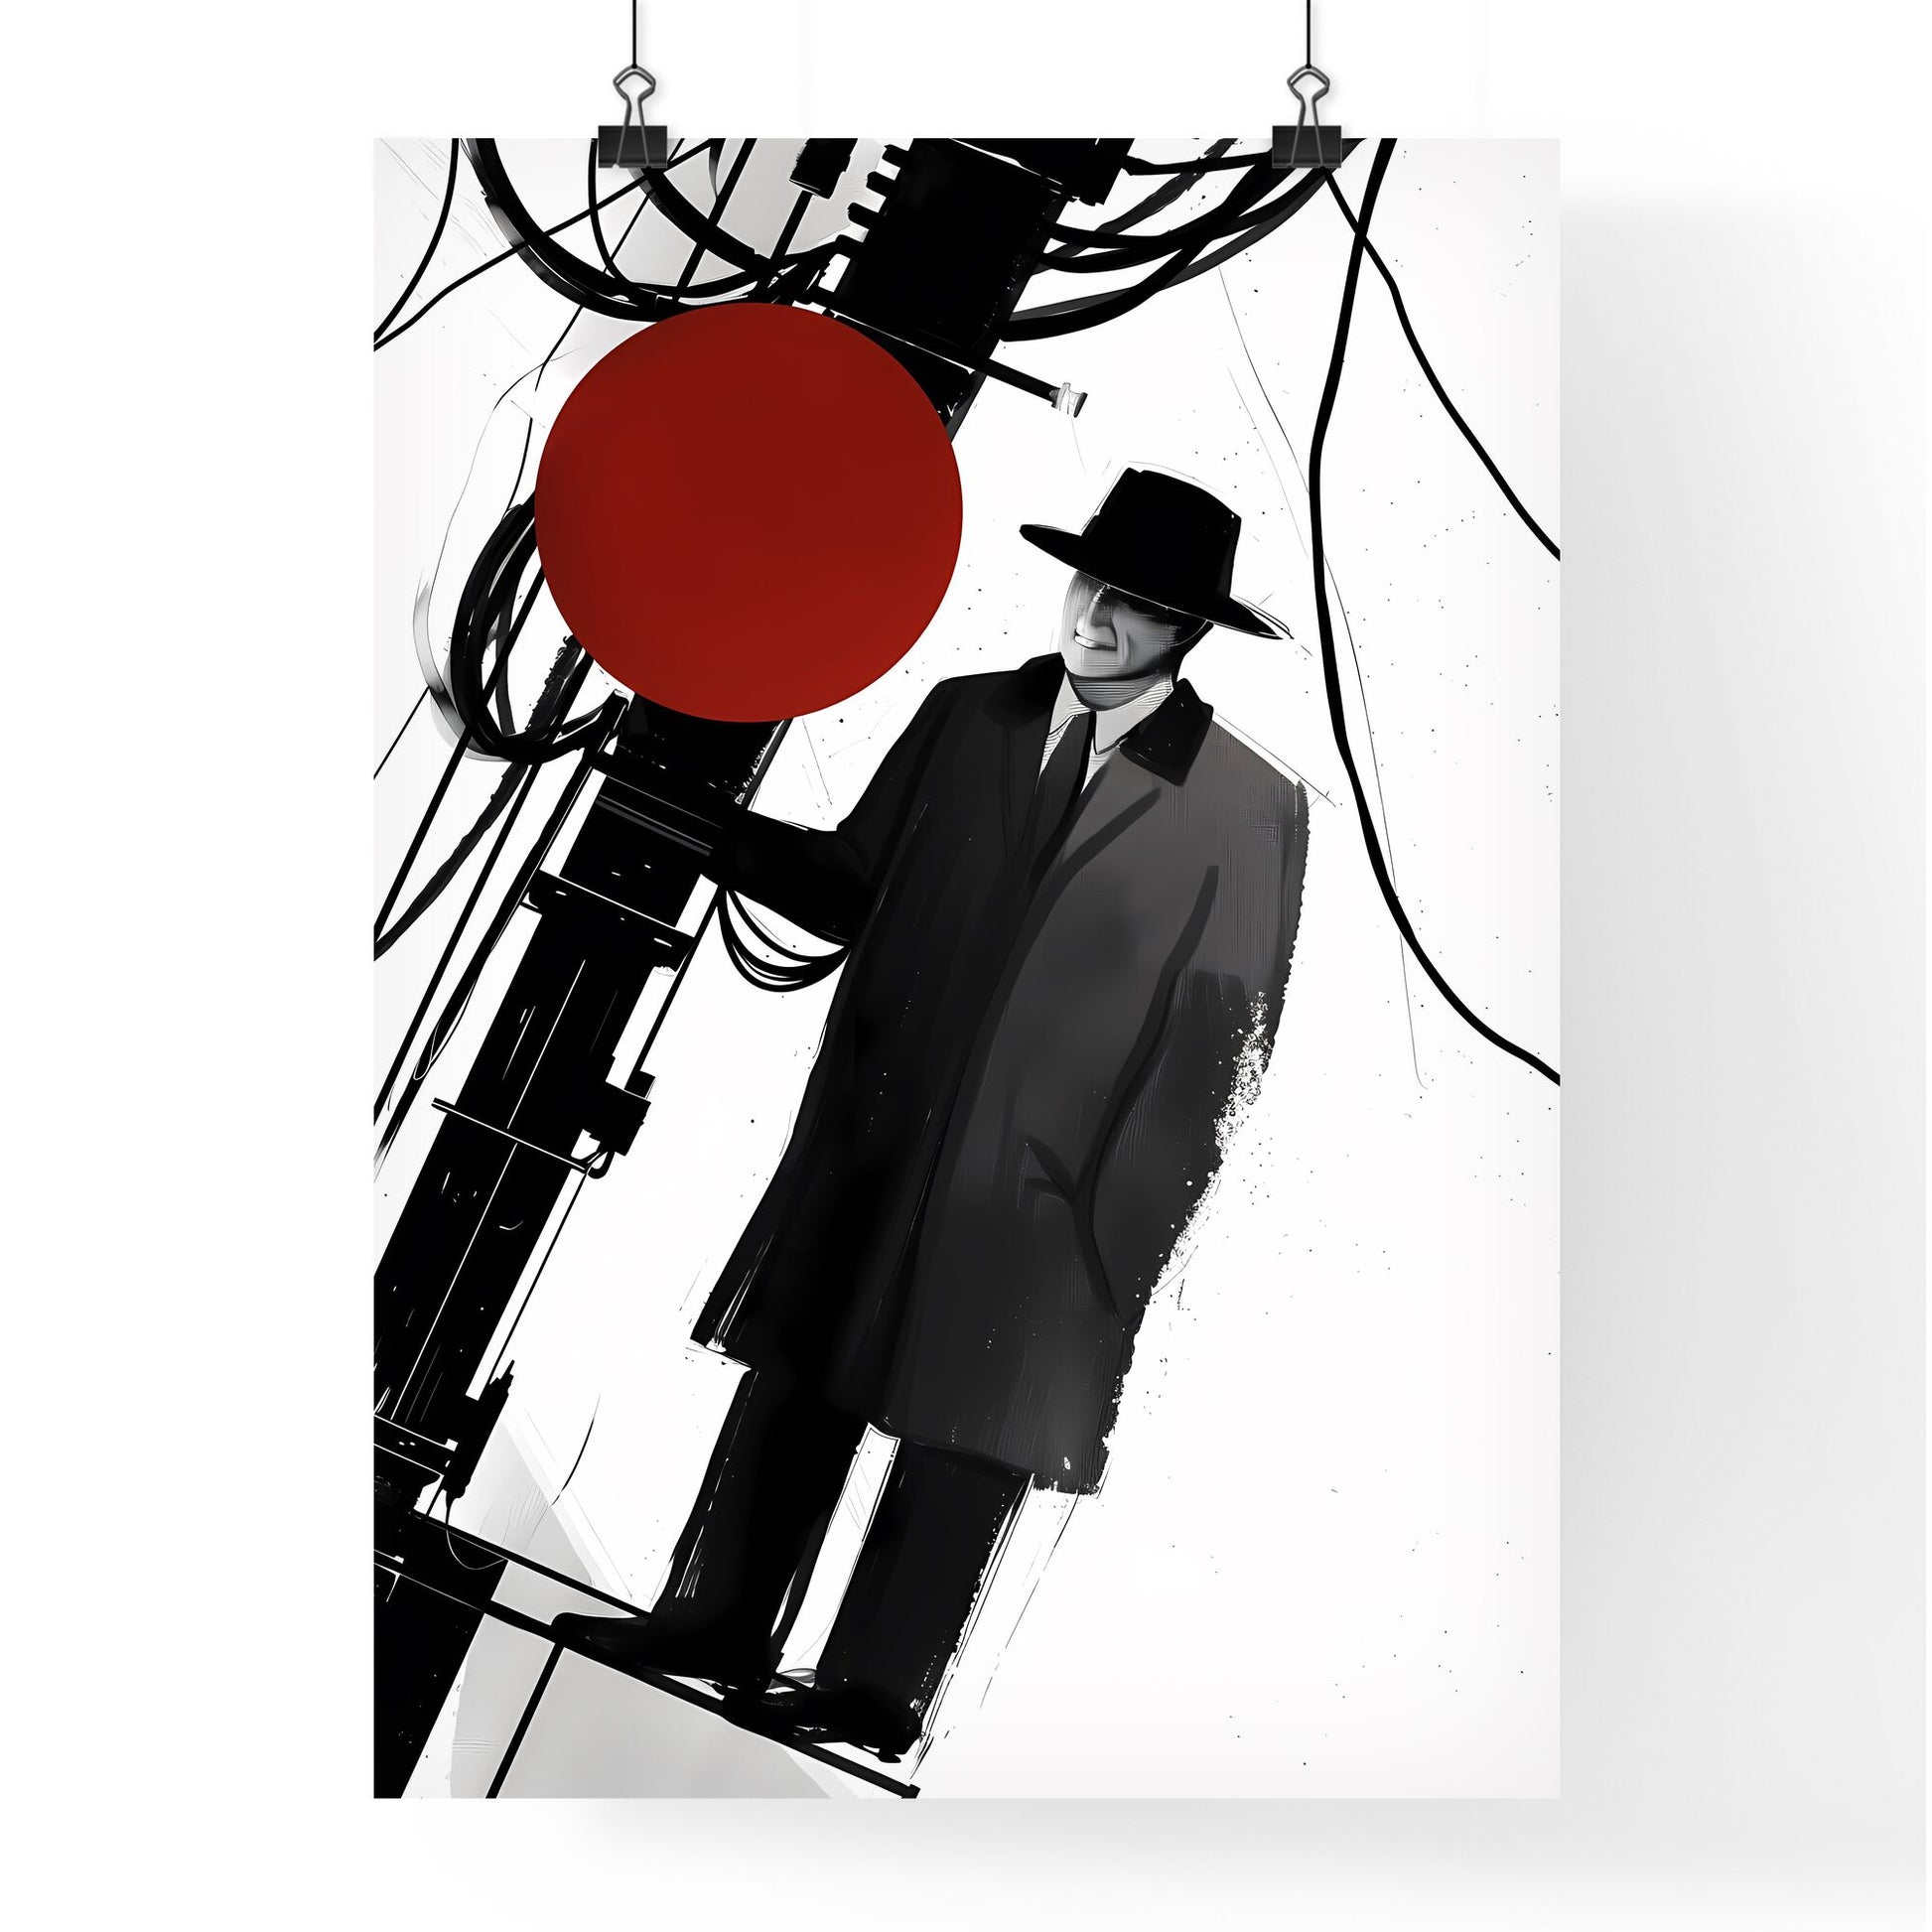 Minimalist Art - Vibrant Painting of a Man in a Hat and Coat Standing by a Pole with Wires Default Title